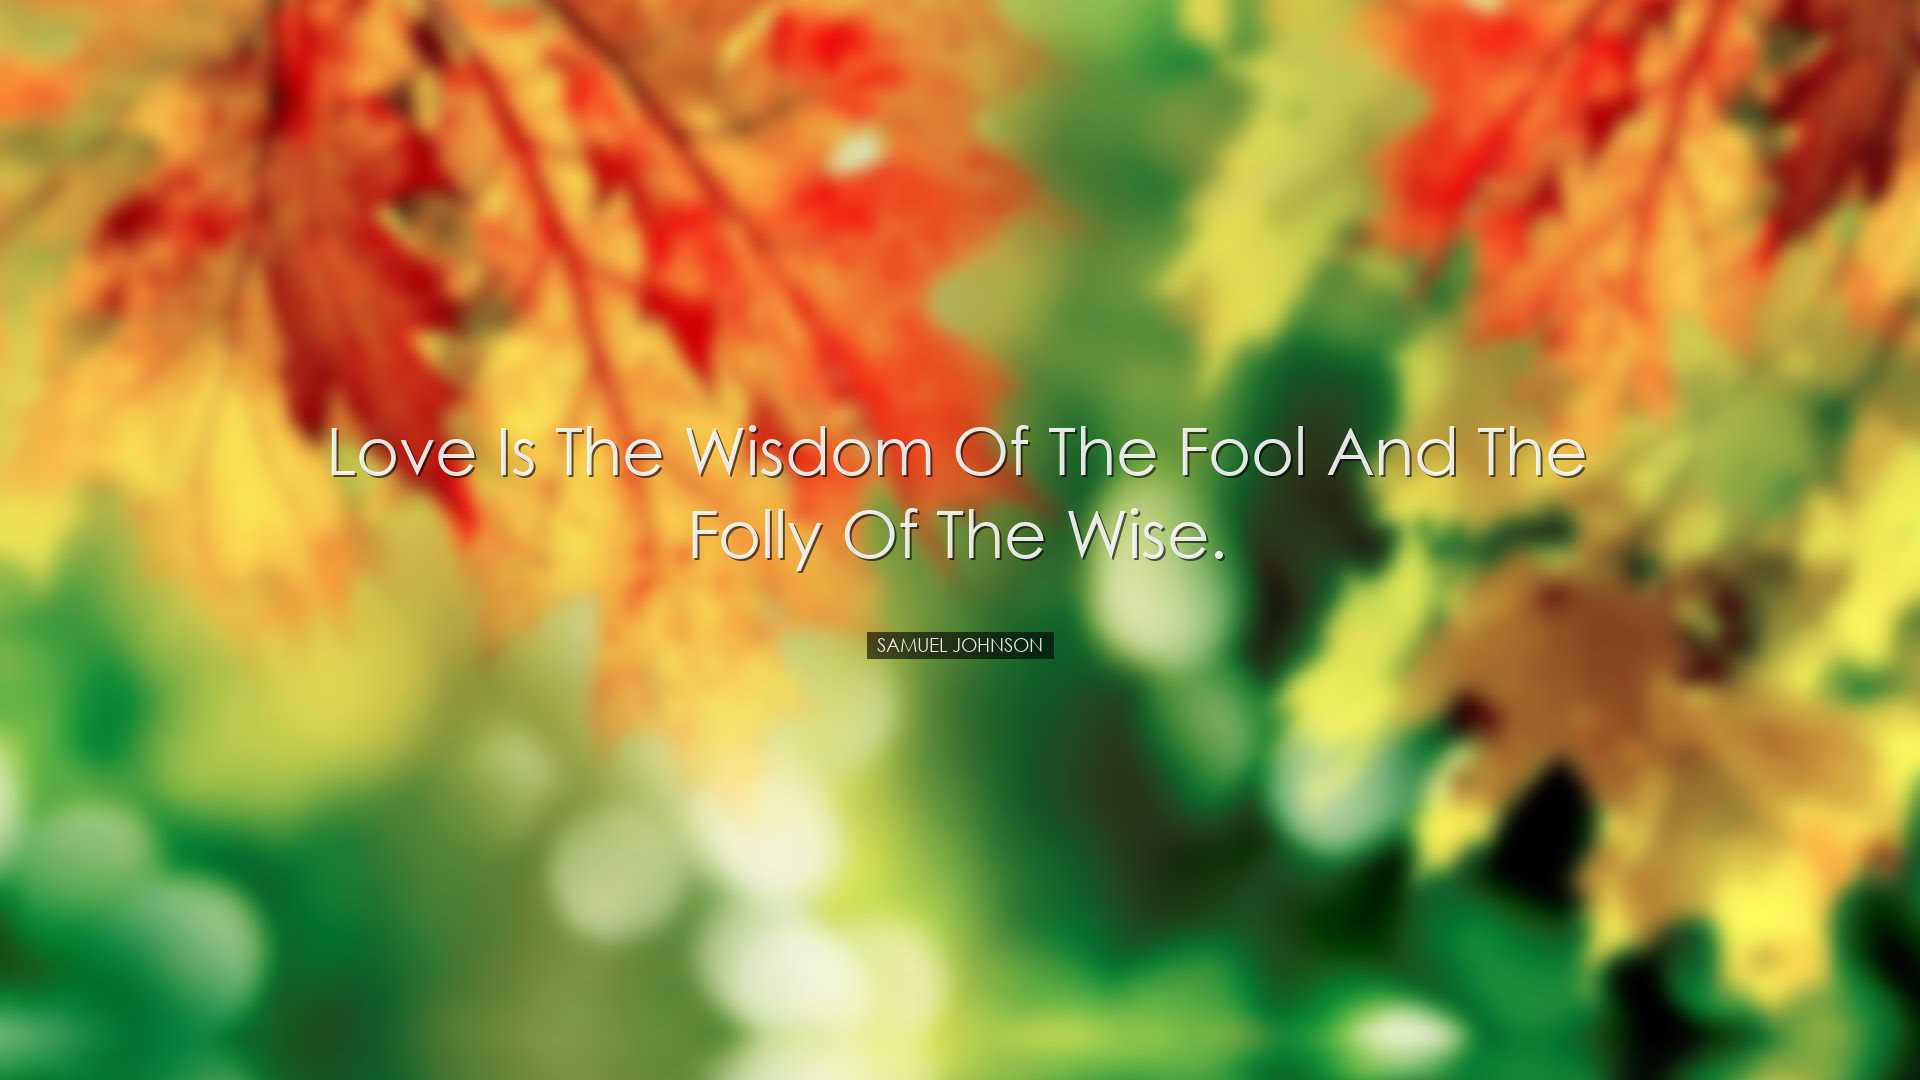 Love is the wisdom of the fool and the folly of the wise. - Samuel